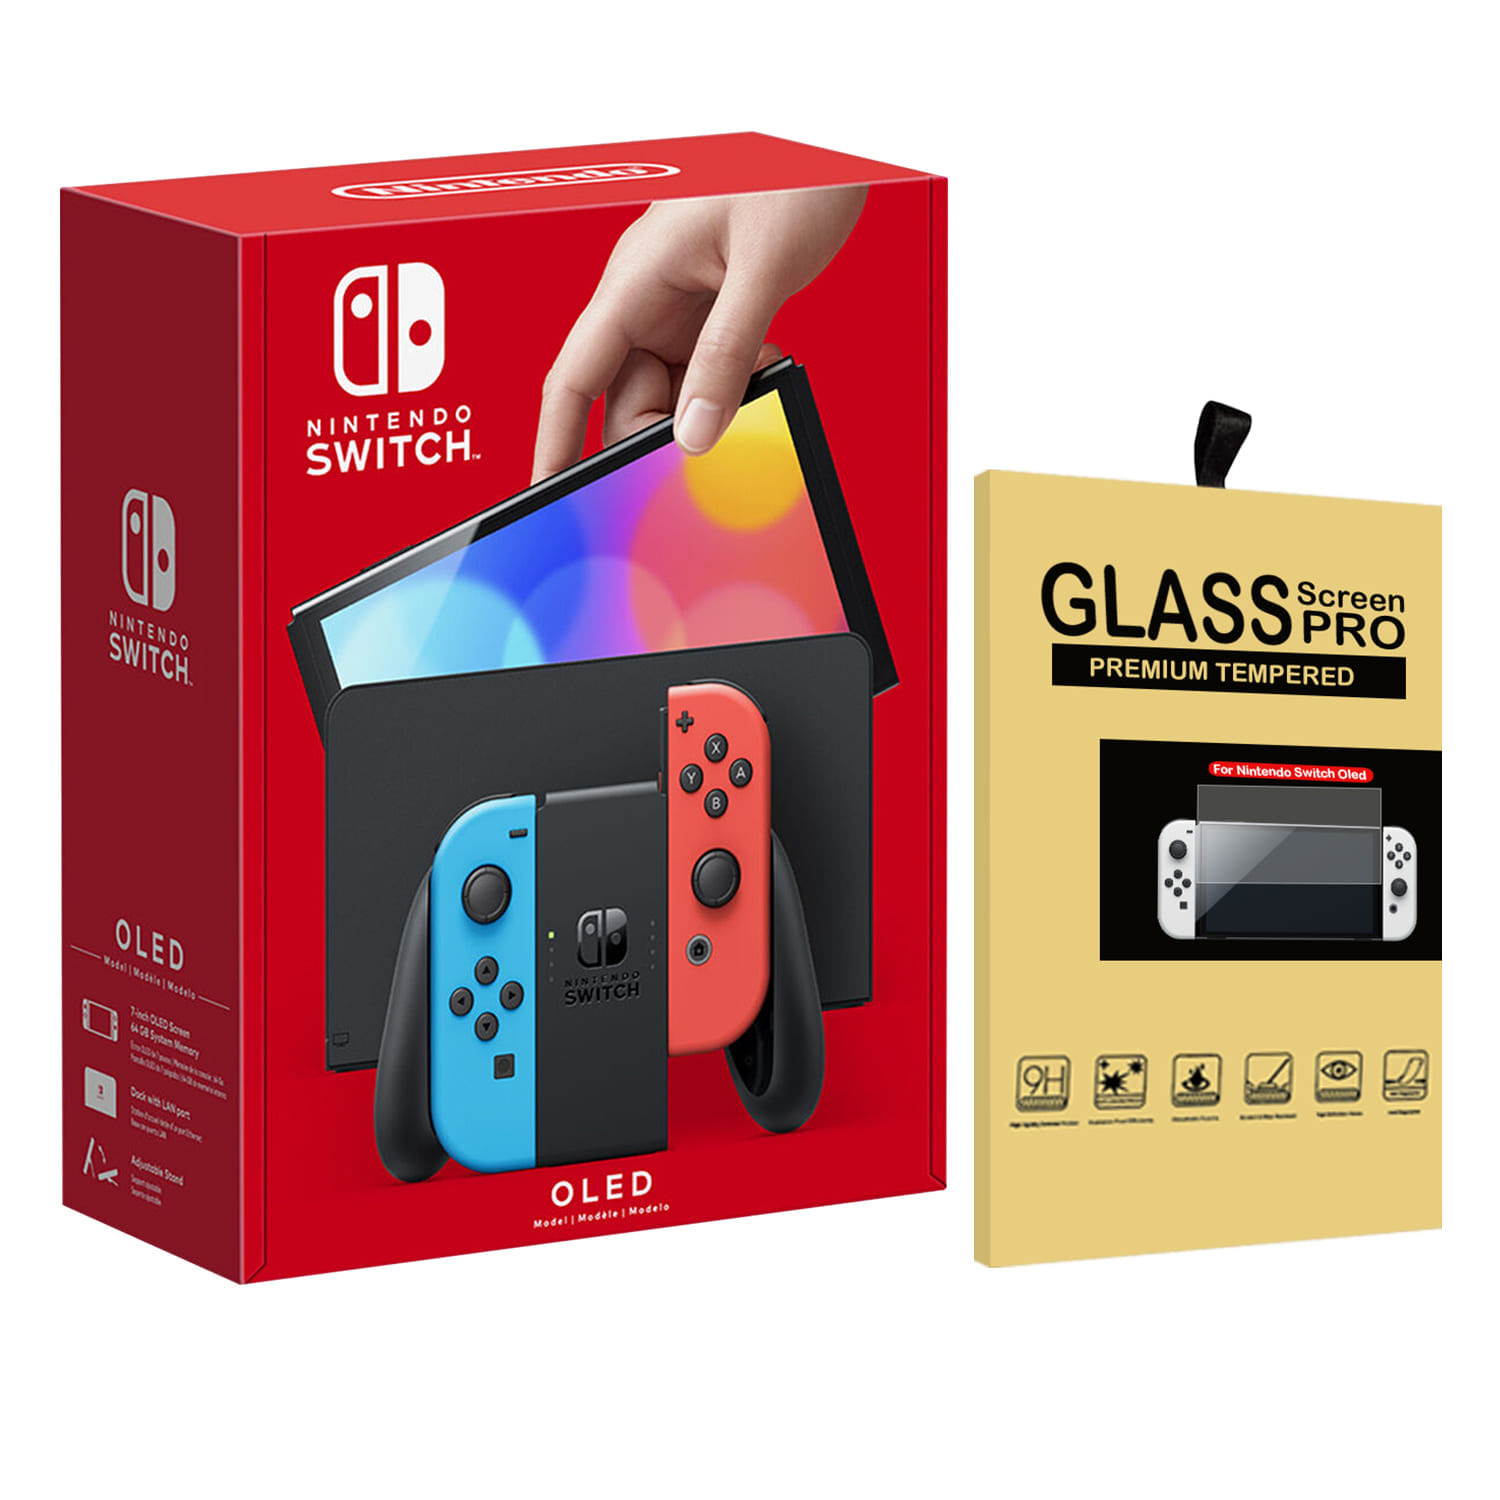 Consola Nintendo Switch OLED Neon + Glass Protector